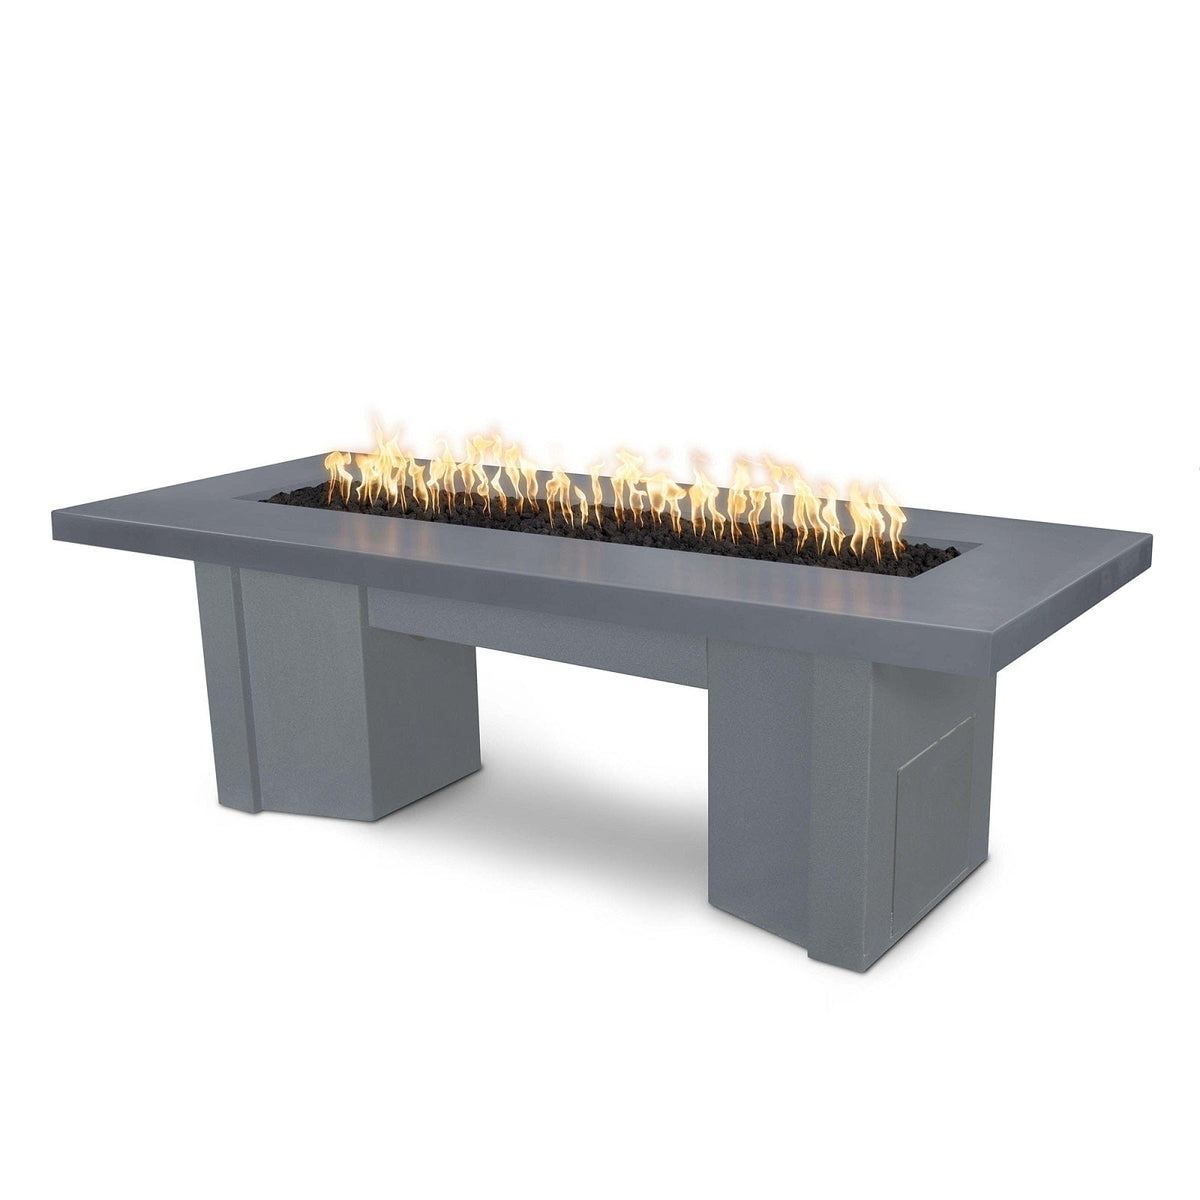 The Outdoor Plus Fire Features Gray (-GRY) / Gray Powder Coated Steel (-GRY) The Outdoor Plus 60&quot; Alameda Fire Table Smooth Concrete in Natural Gas - Match Lit with Flame Sense System / OPT-ALMGFRC60FSML-NG